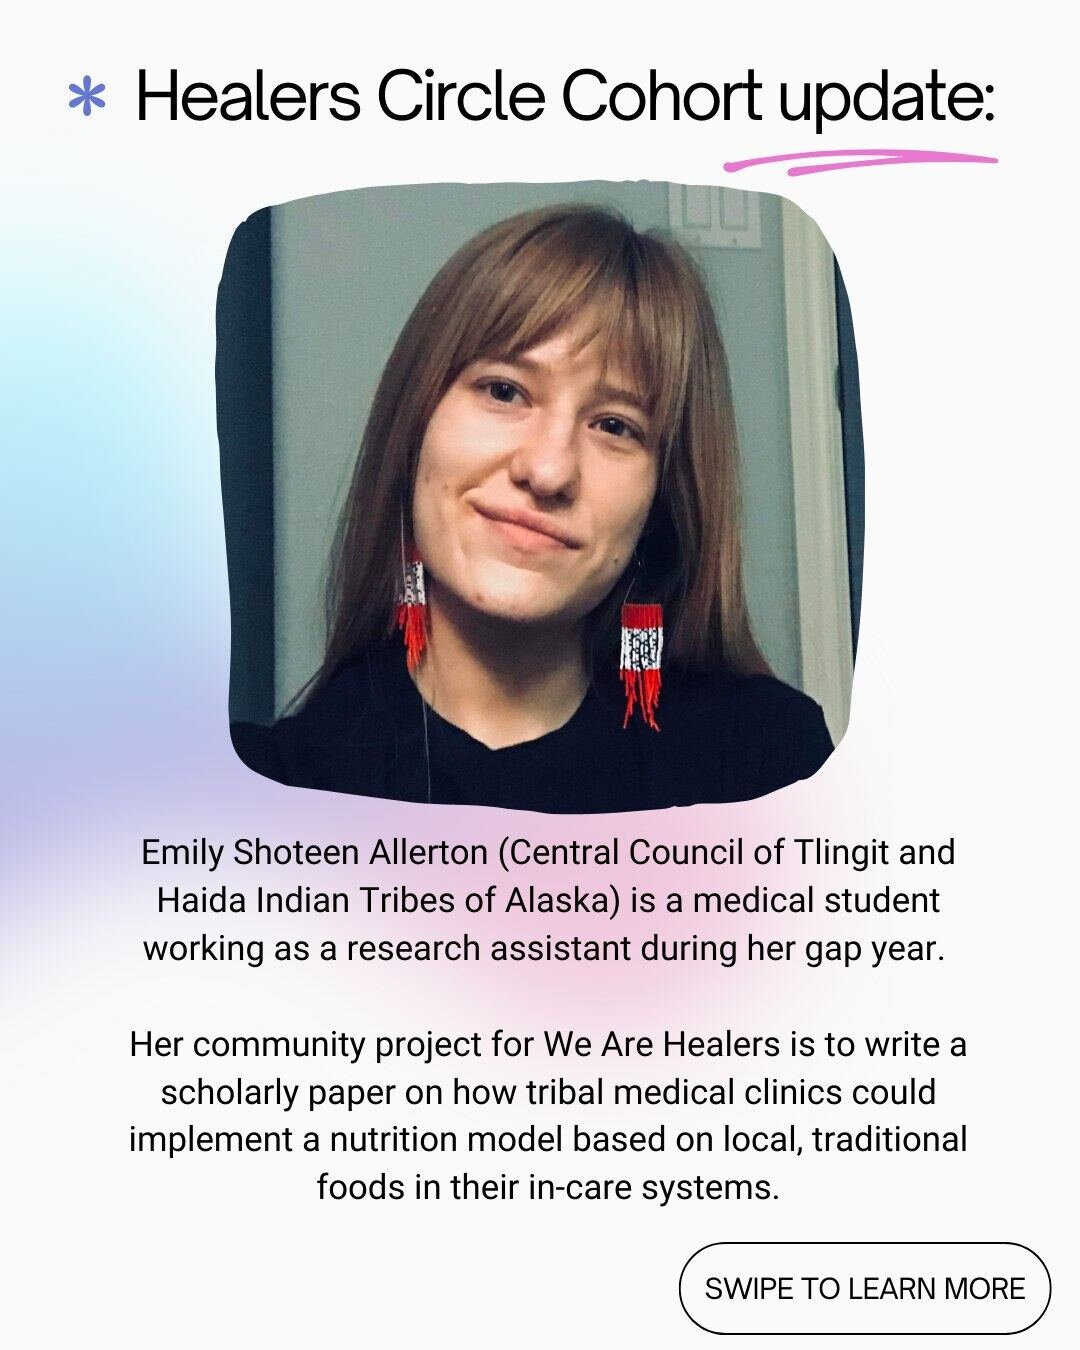 💜✨ Healers Circle Cohort update:

Emily Shoteen Allerton @_errantry_ (Central Council of Tlingit and Haida Indian Tribes of Alaska) is a medical student working as a research assistant during her gap year. 

Her community project for We Are Healers 